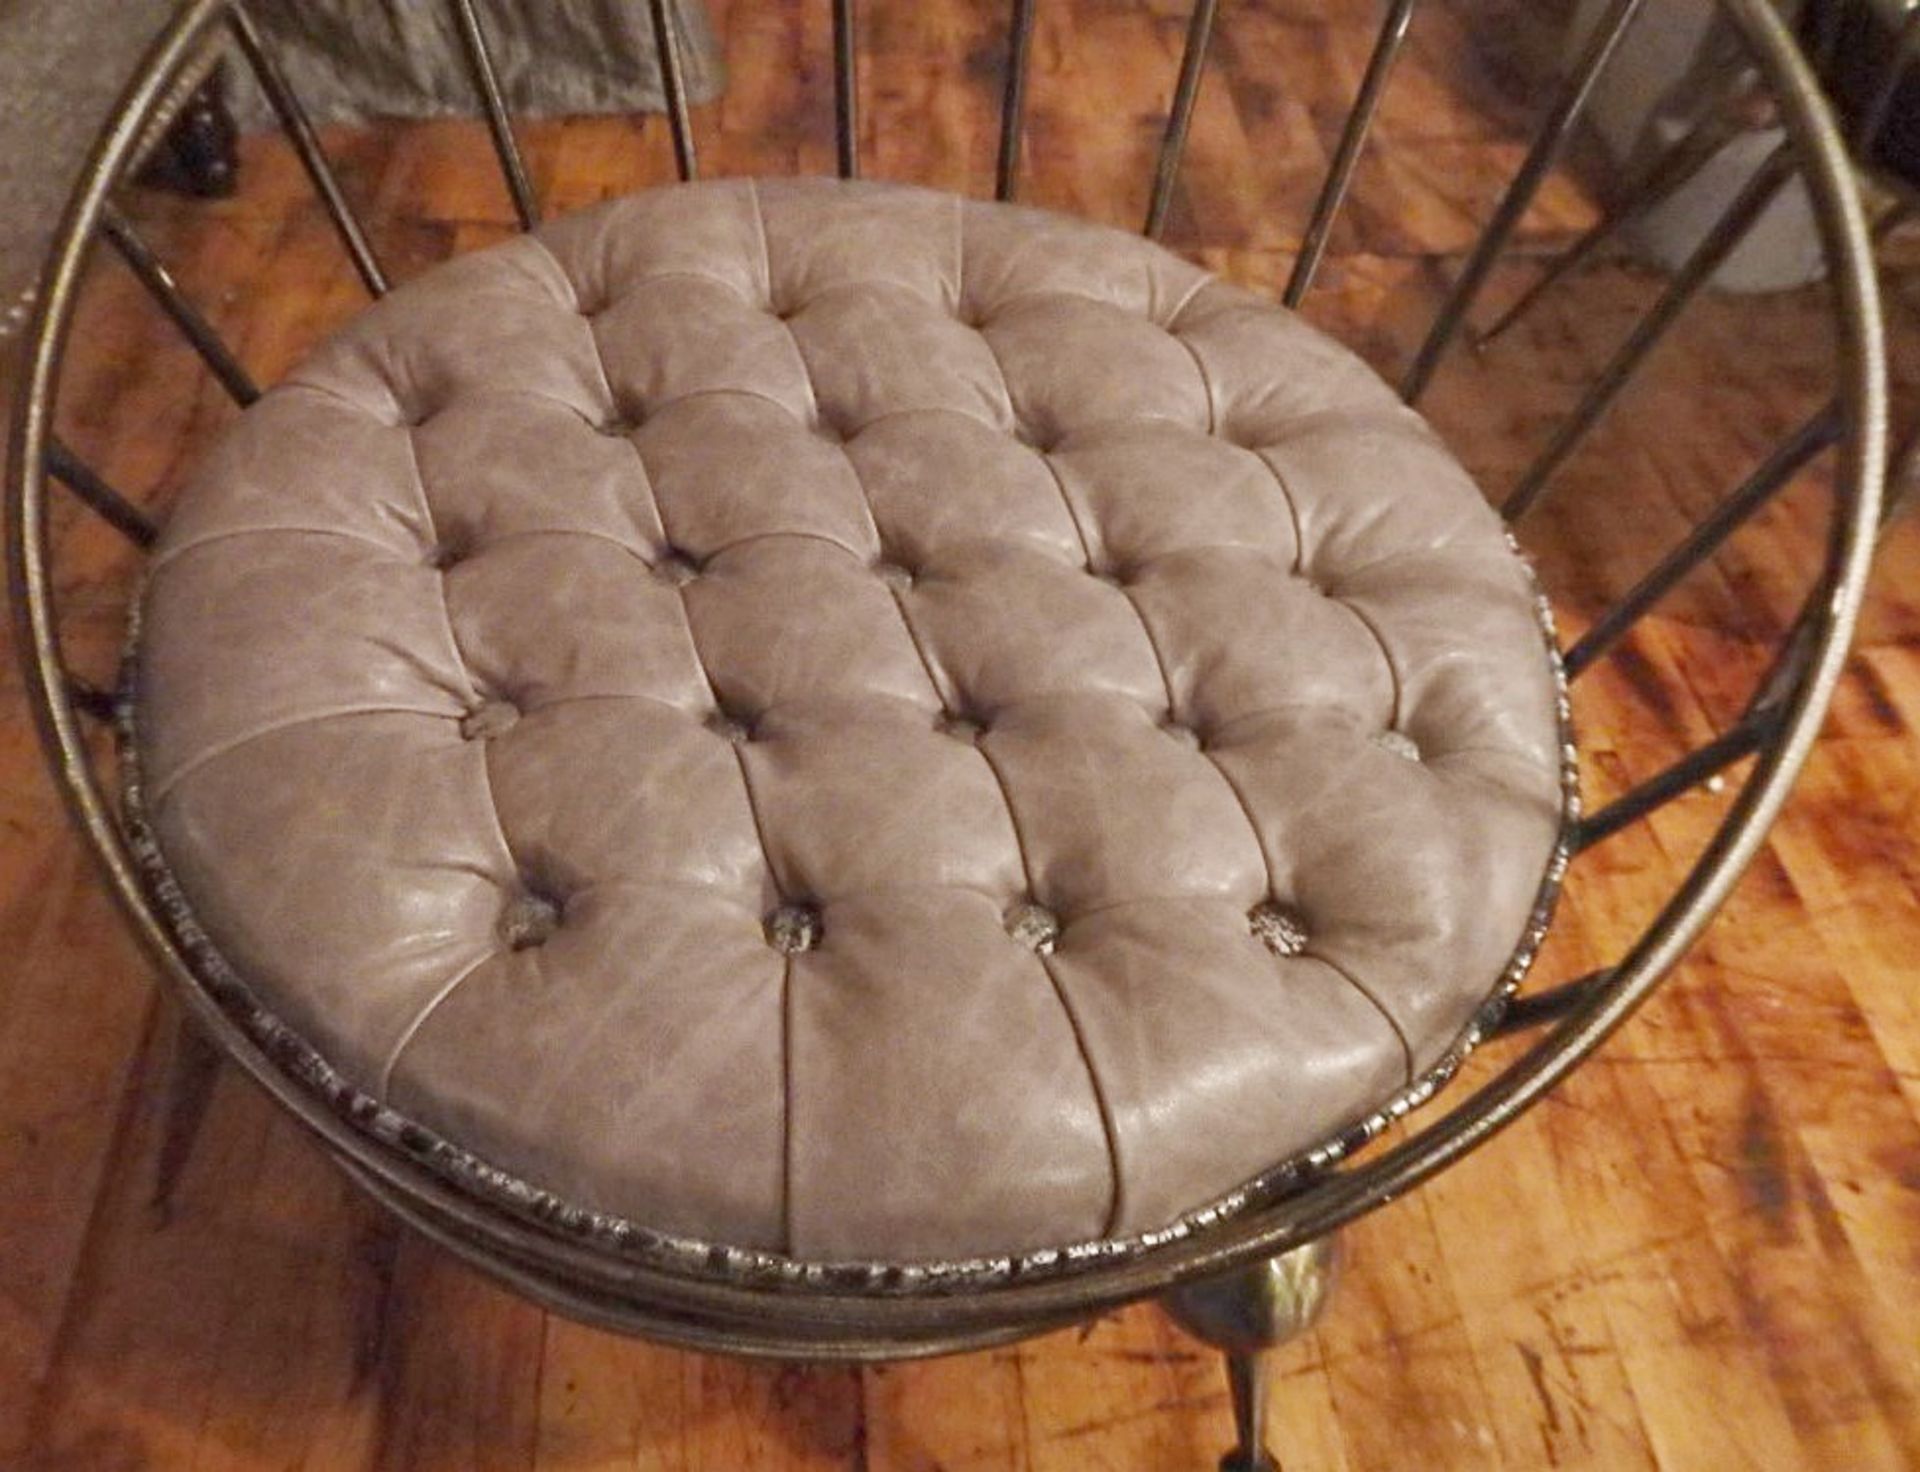 1 x Bespoke Handcrafted Chair - Unique Metal Framework With Leather Upholstered Cushion  - Colour: - Image 5 of 6